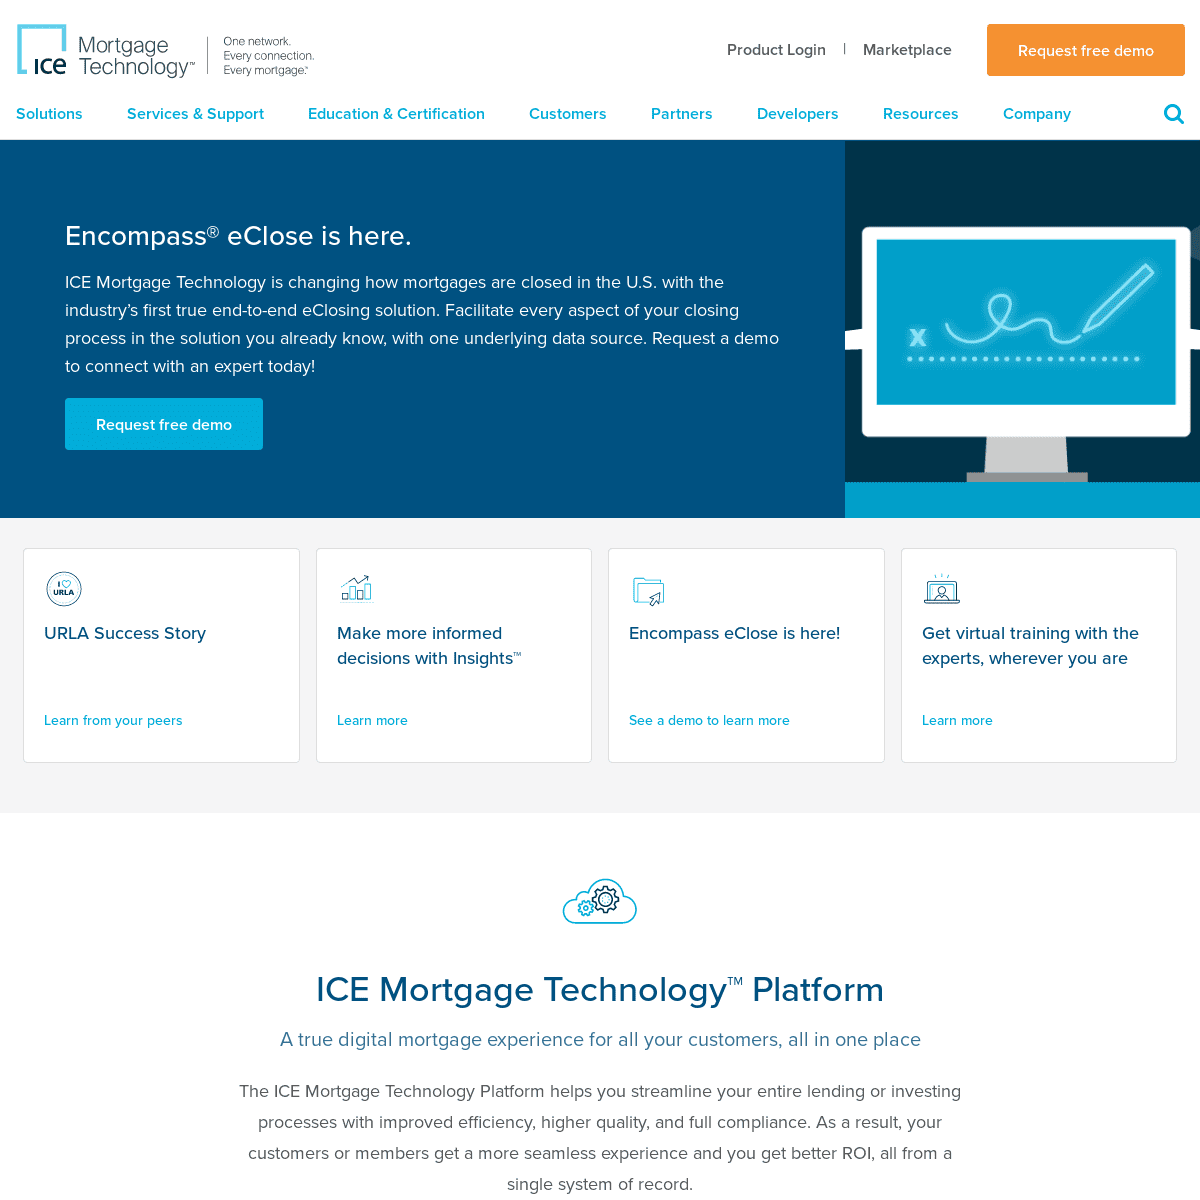 A complete backup of https://icemortgagetechnology.com